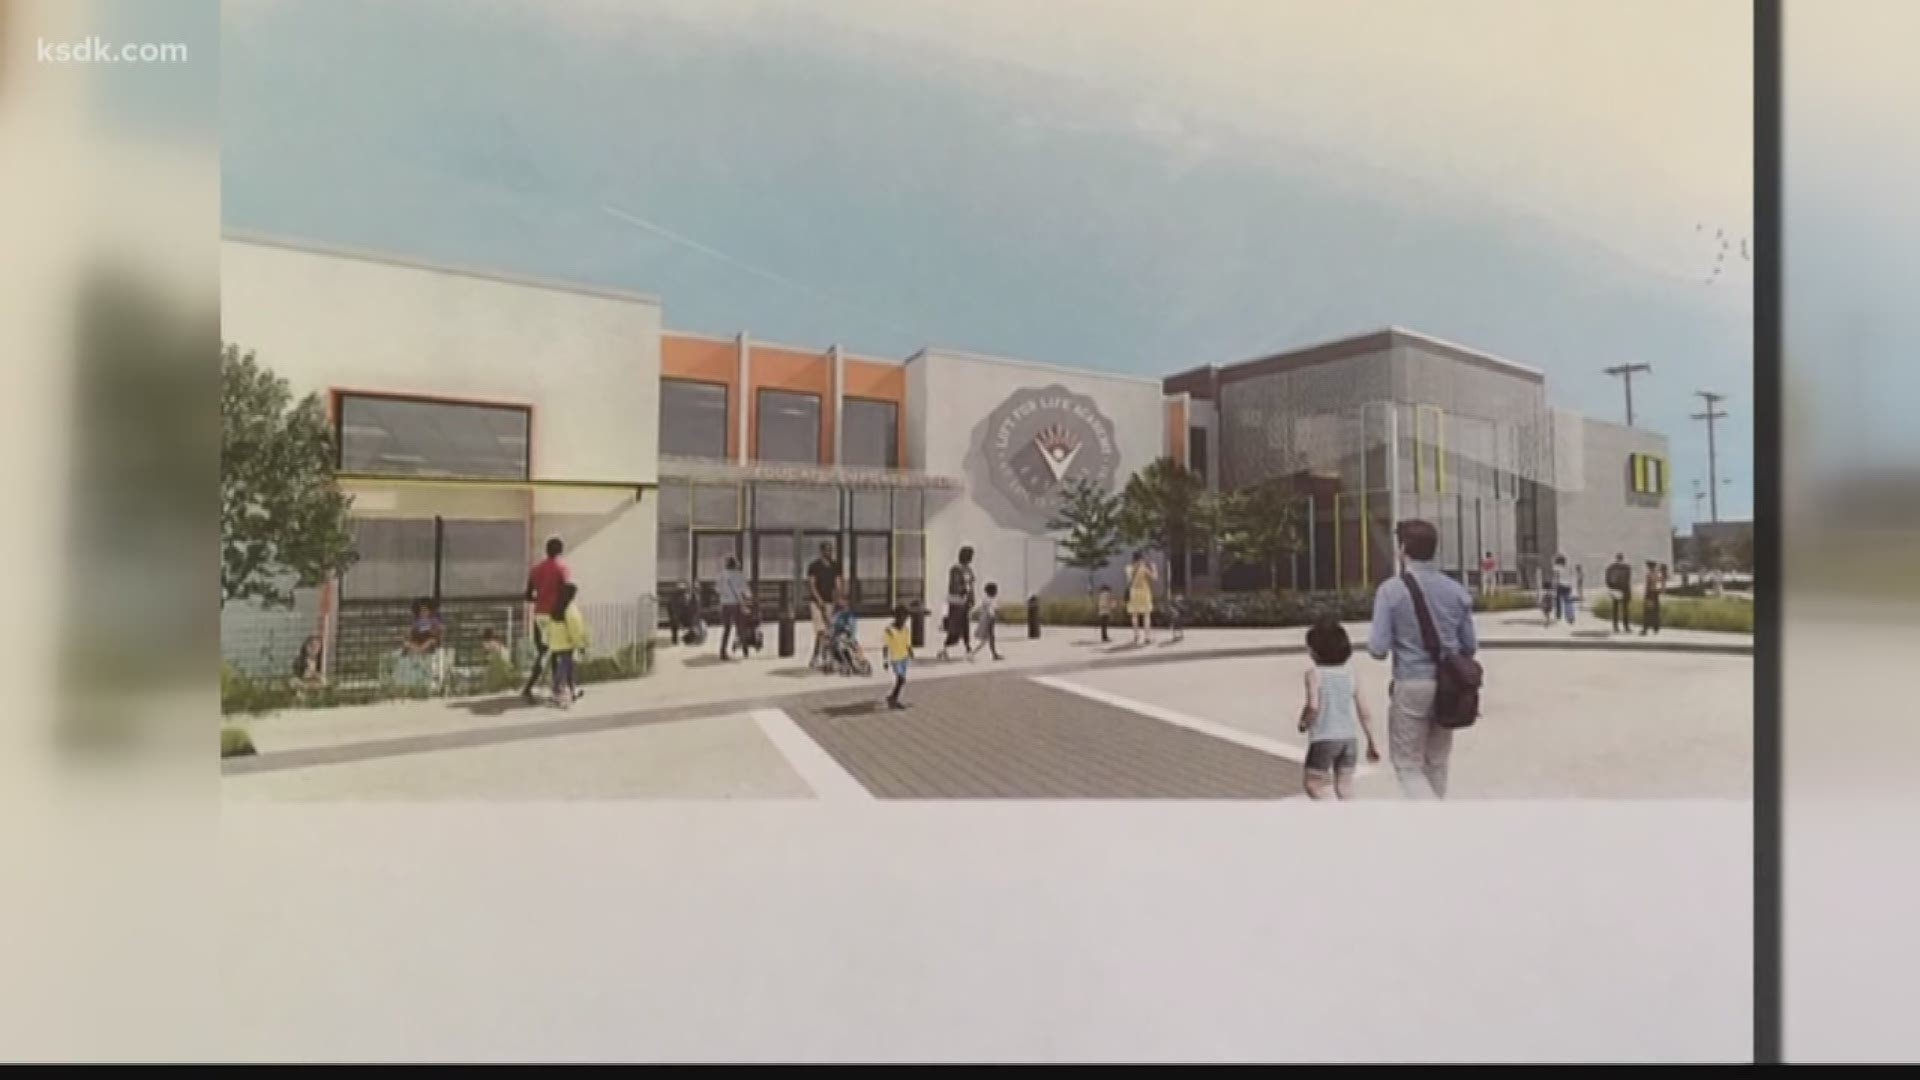 The new charter school will open in August 2019 and serve students in kindergarten through second grade. Officials plan to add a grade each year until they become K-12.